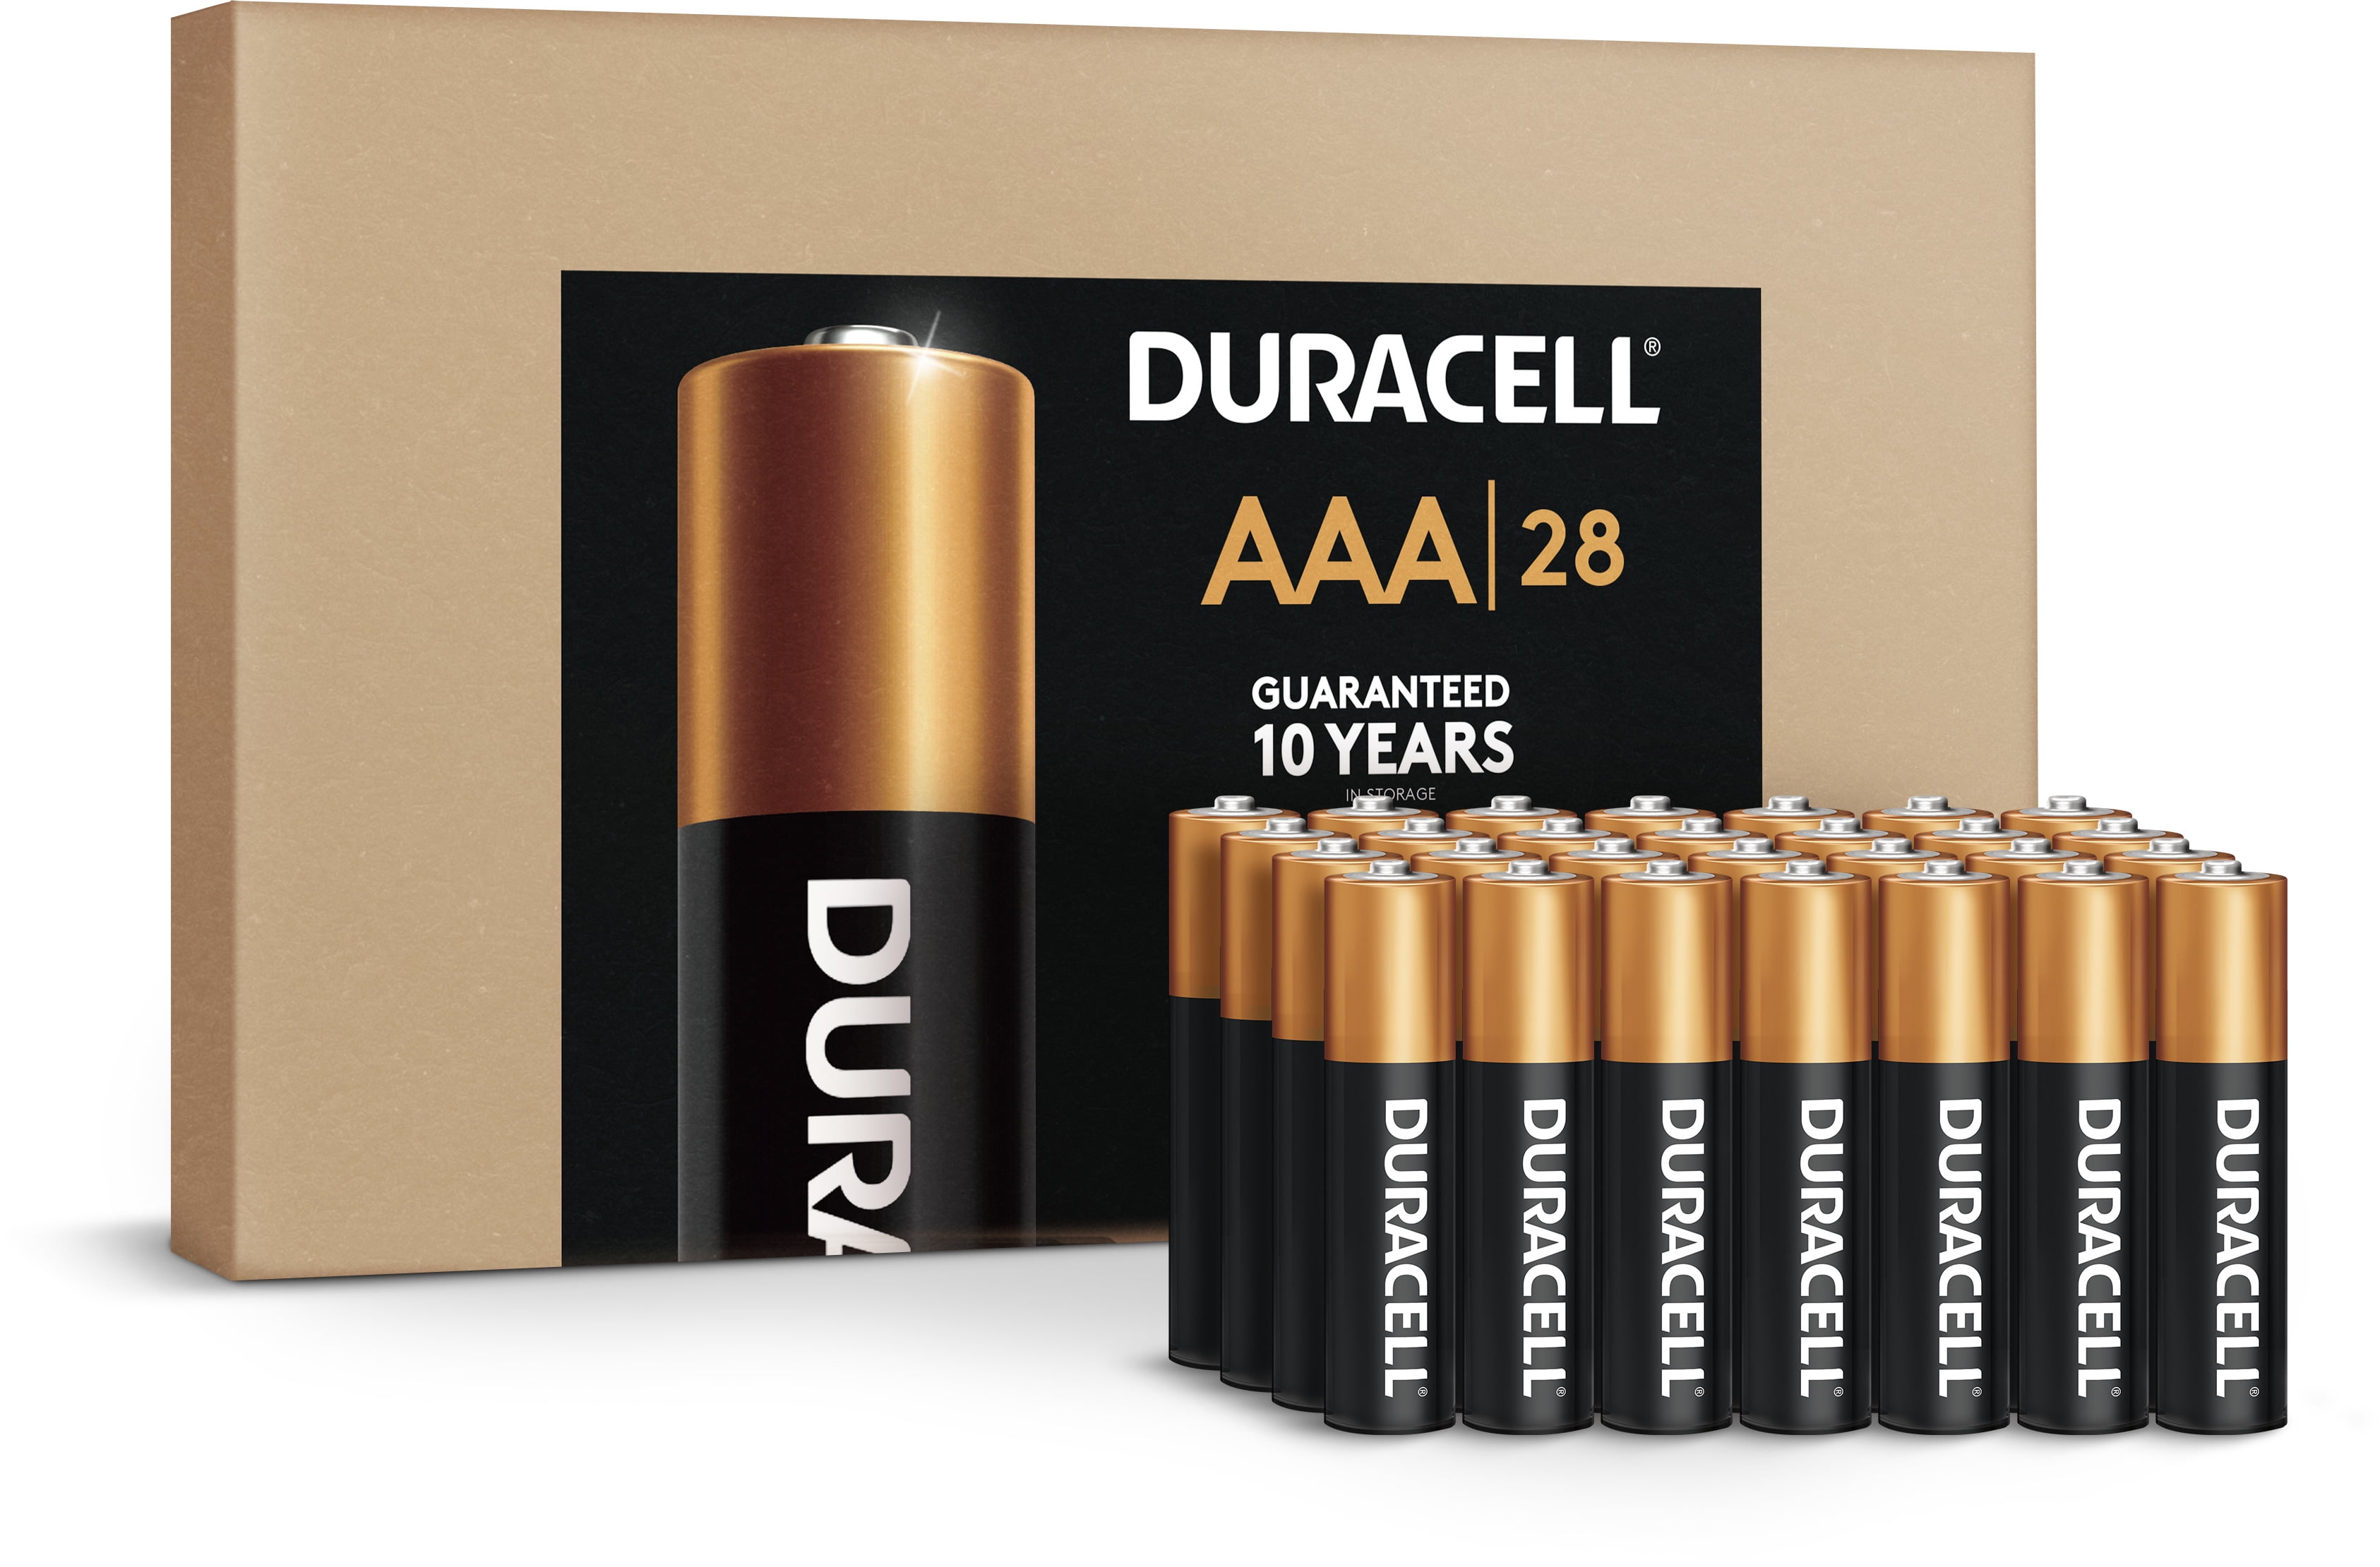 Duracell Rechargeable AAA Batteries (2-Pack) LONG LIFE ION CORE AAA 2CT -  Best Buy